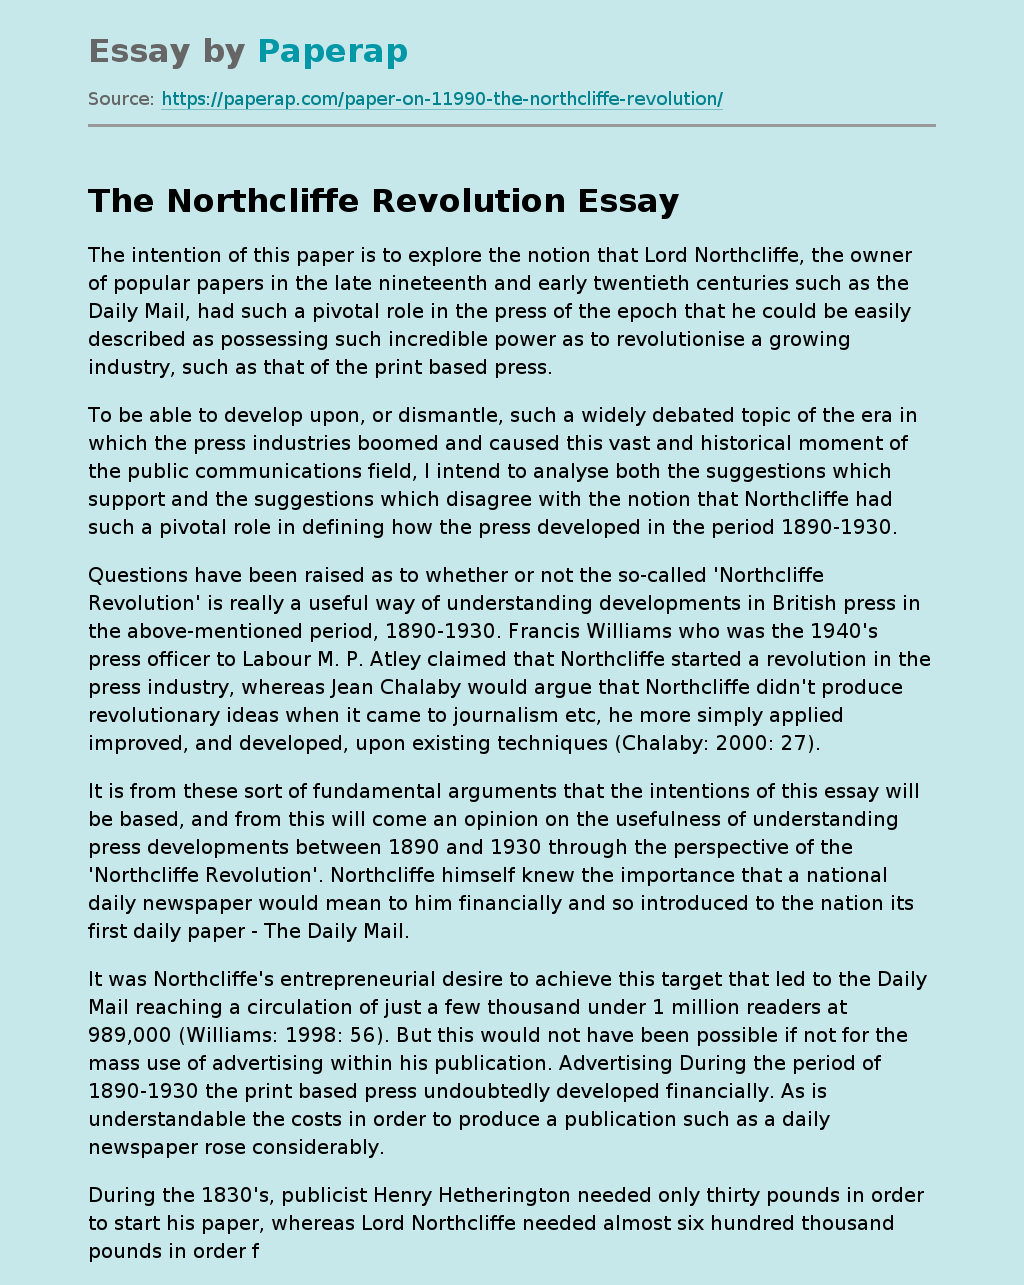 The Northcliffe Revolution: The Rise of the Commercial Newspaper